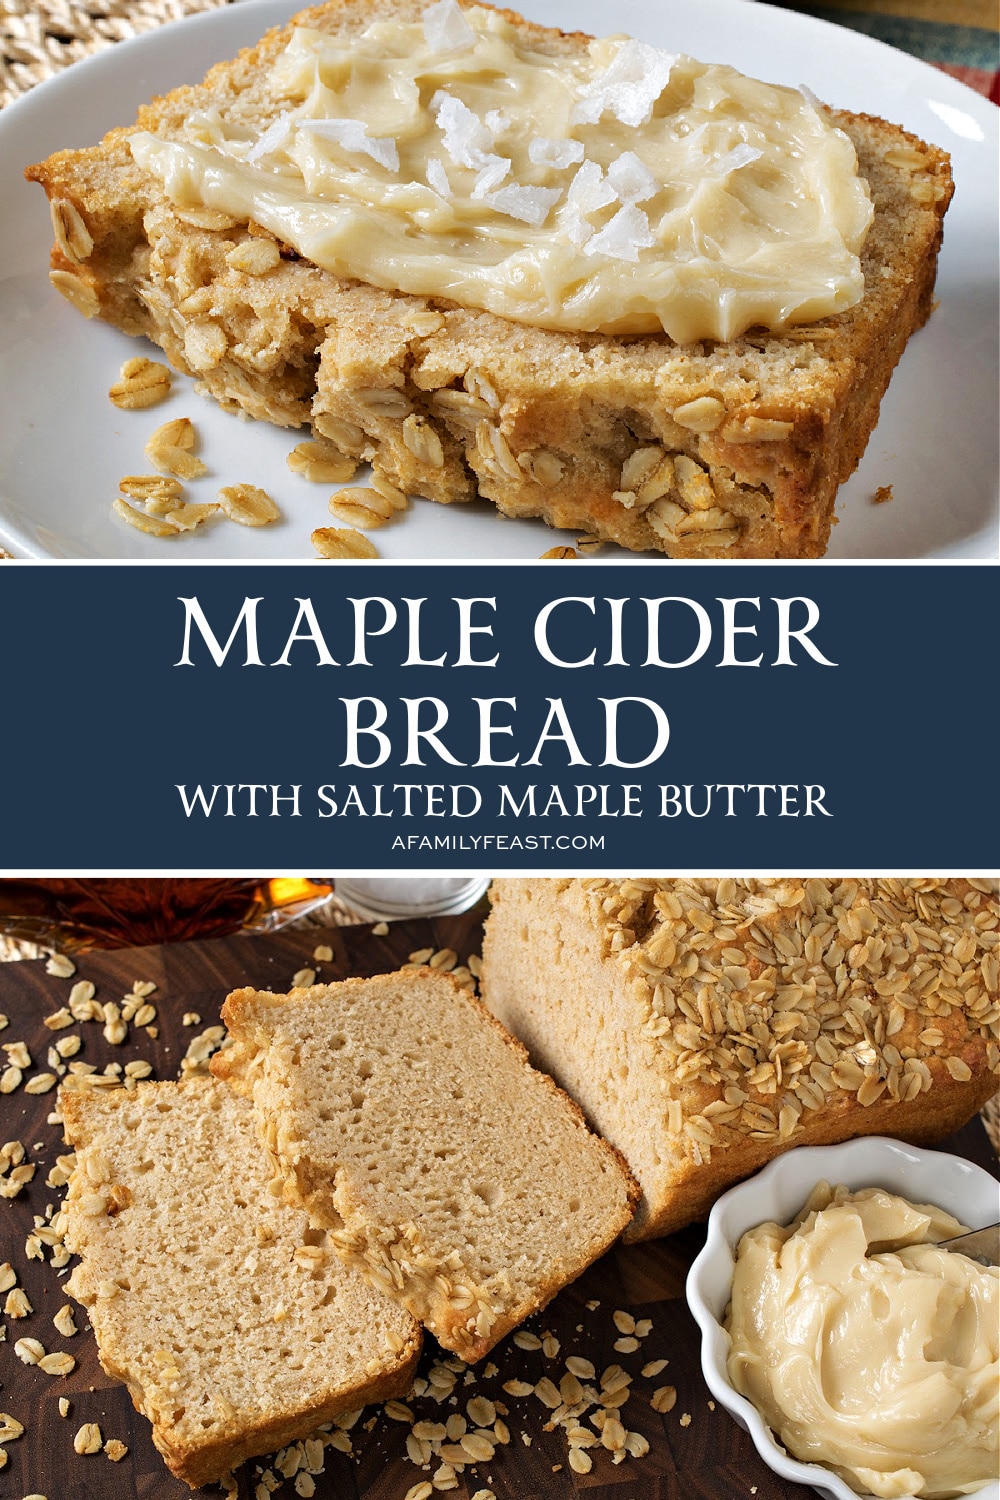 Maple Cider Bread with Salted Maple Butter